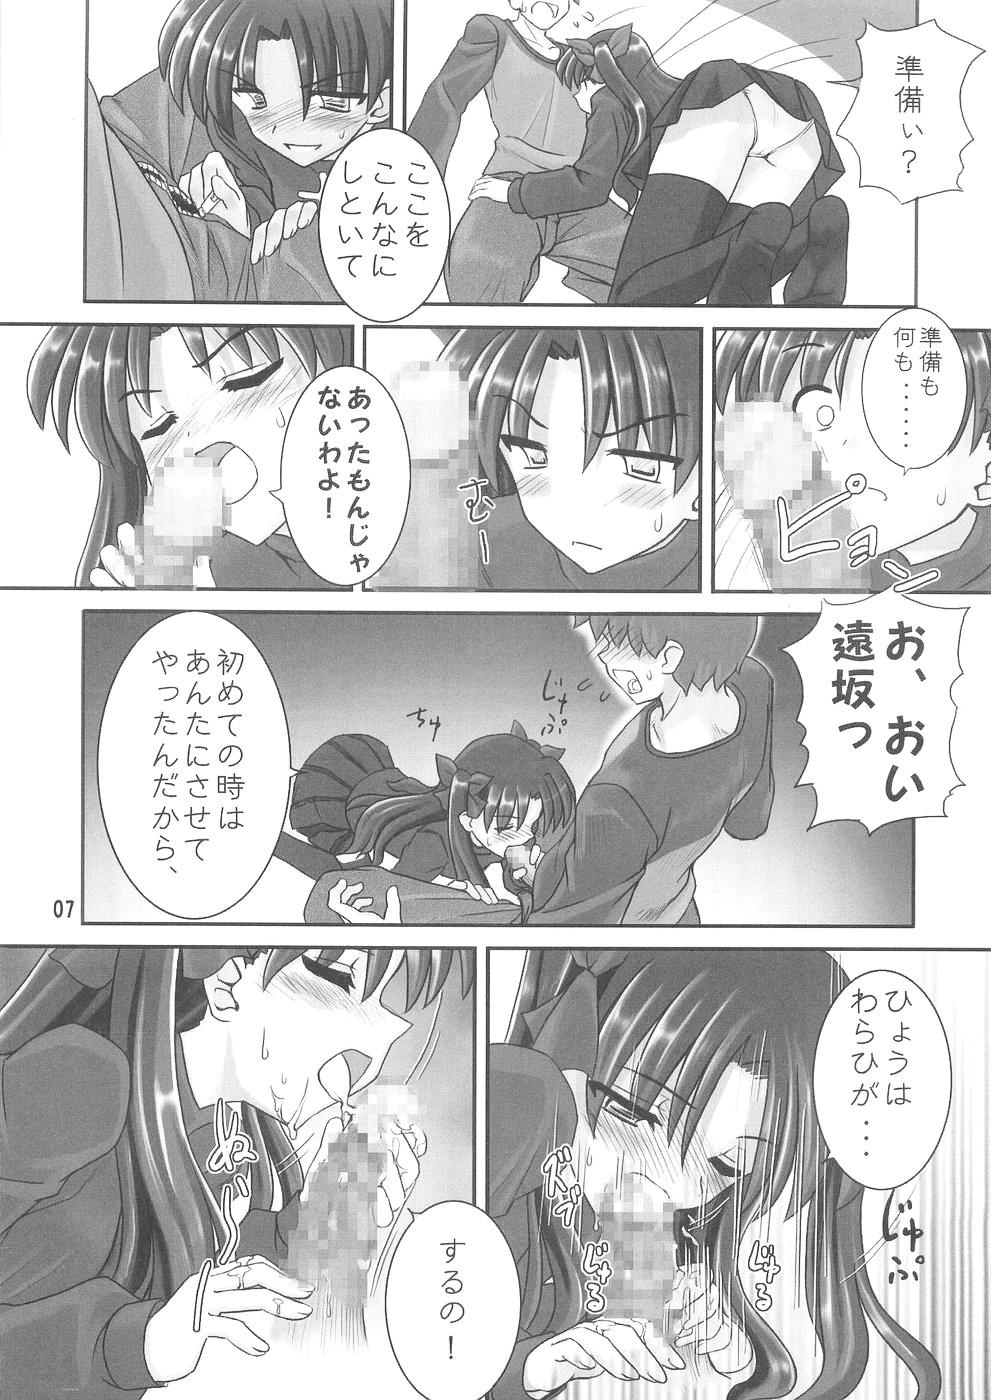 Belly Moon Marguerite - Fate stay night Erotica - Page 6